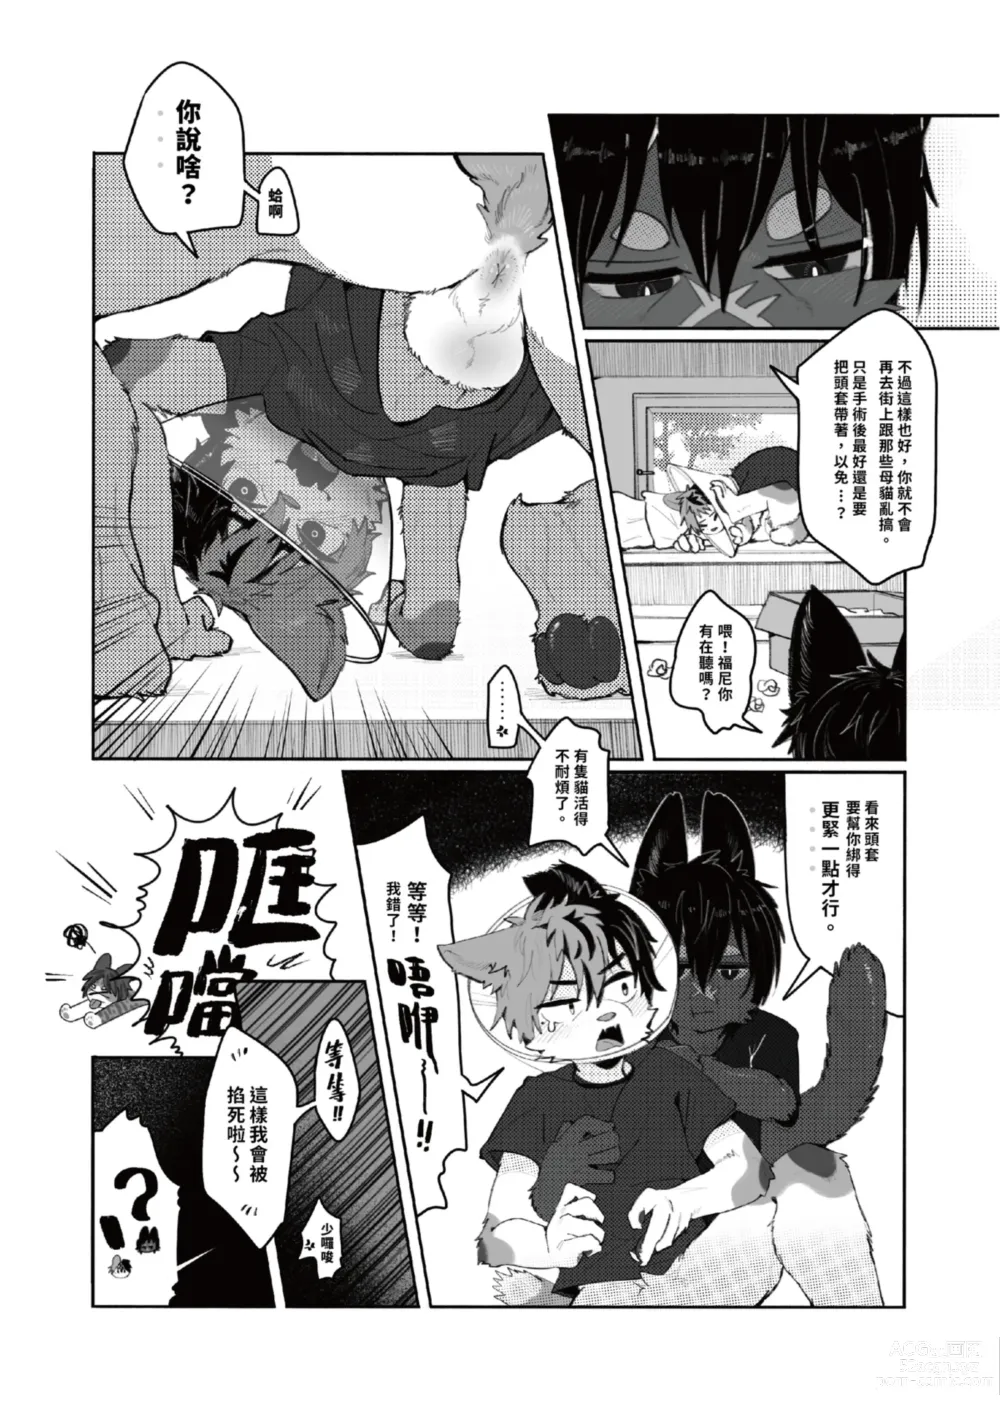 Page 5 of doujinshi 巷弄發浪 Heat Alley